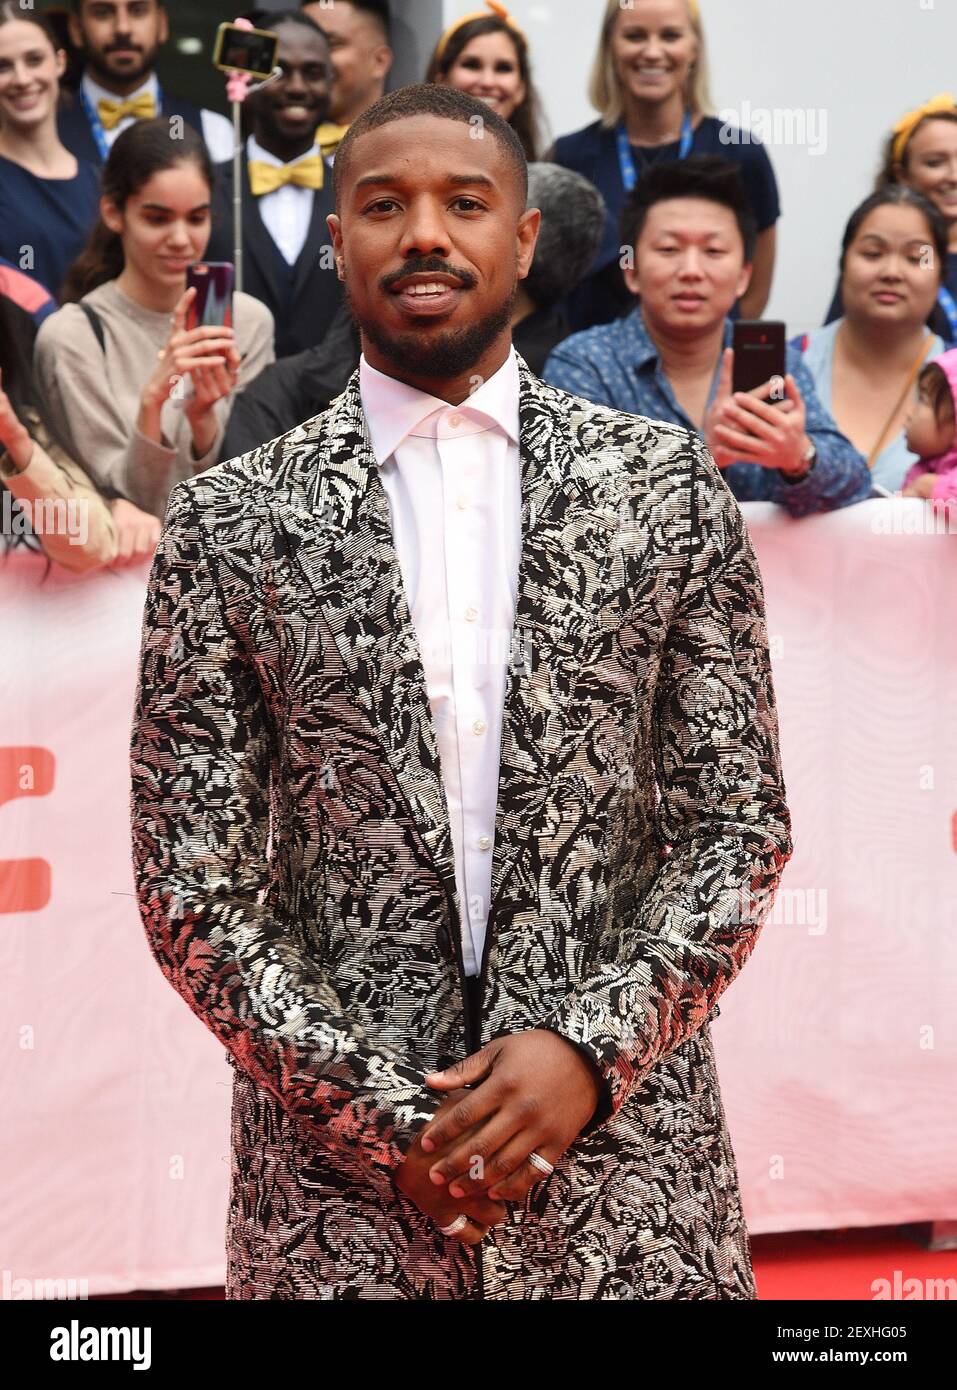 TORONTO, ONTARIO - SEPTEMBER 06: Michael B. Jordan attends the 'Just Mercy' premiere during the 2019 Toronto International Film Festival at Roy Thomson Hall on September 06, 2019 in Toronto, Canada. (Photo by imageSPACE/Sipa USA) Stock Photo